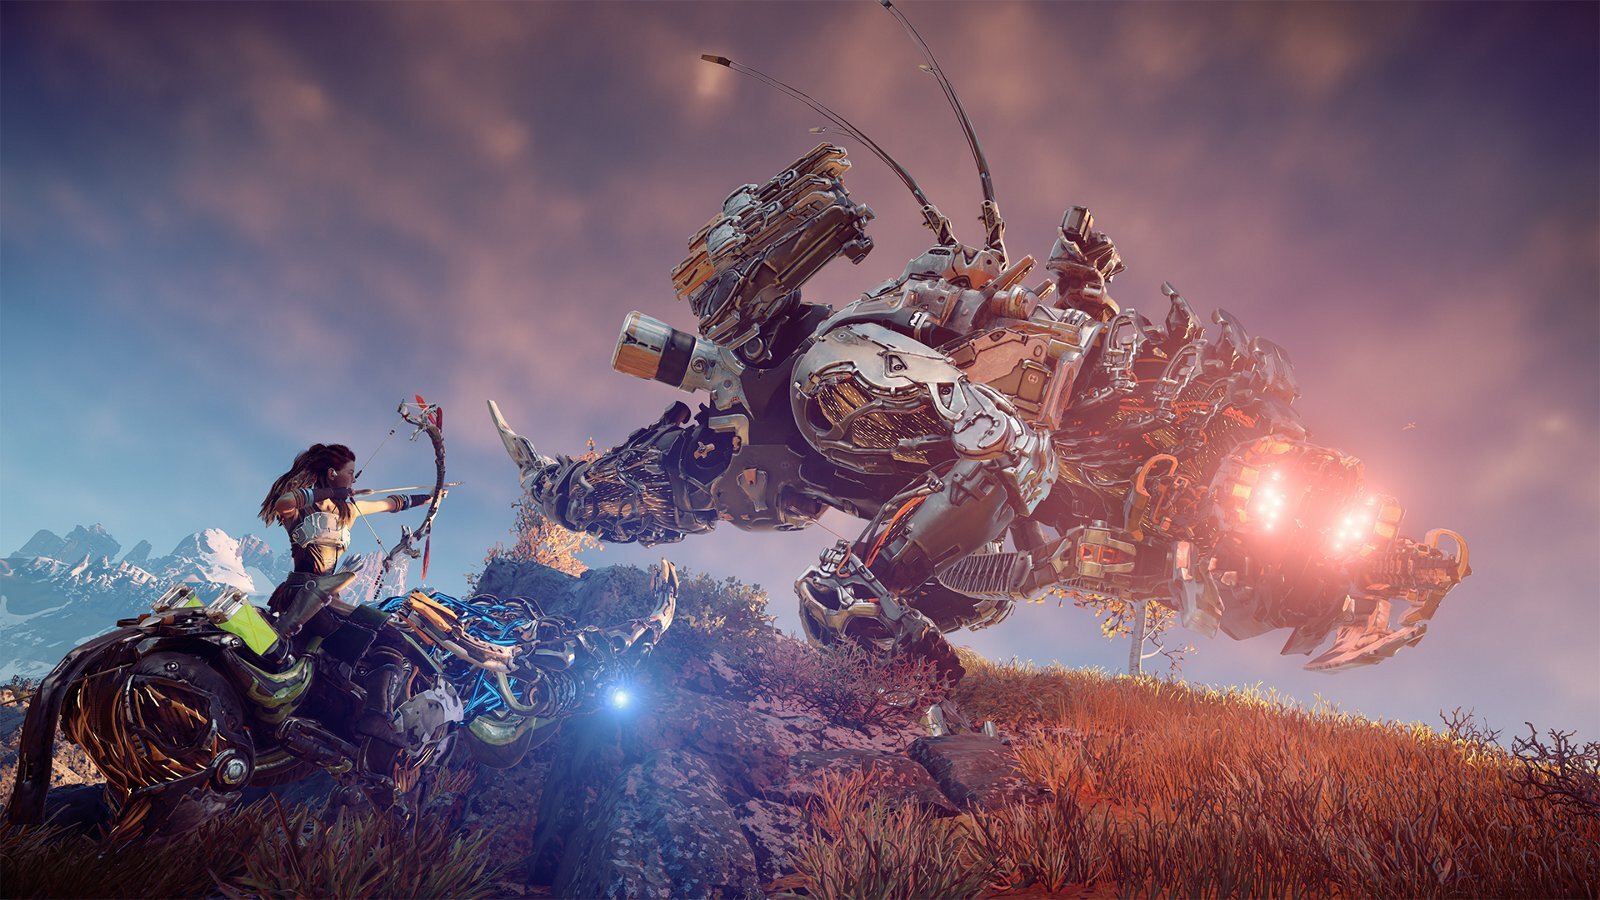 The parallels to riding a bicycle don't quite pan out. (Image: Guerrilla Games)